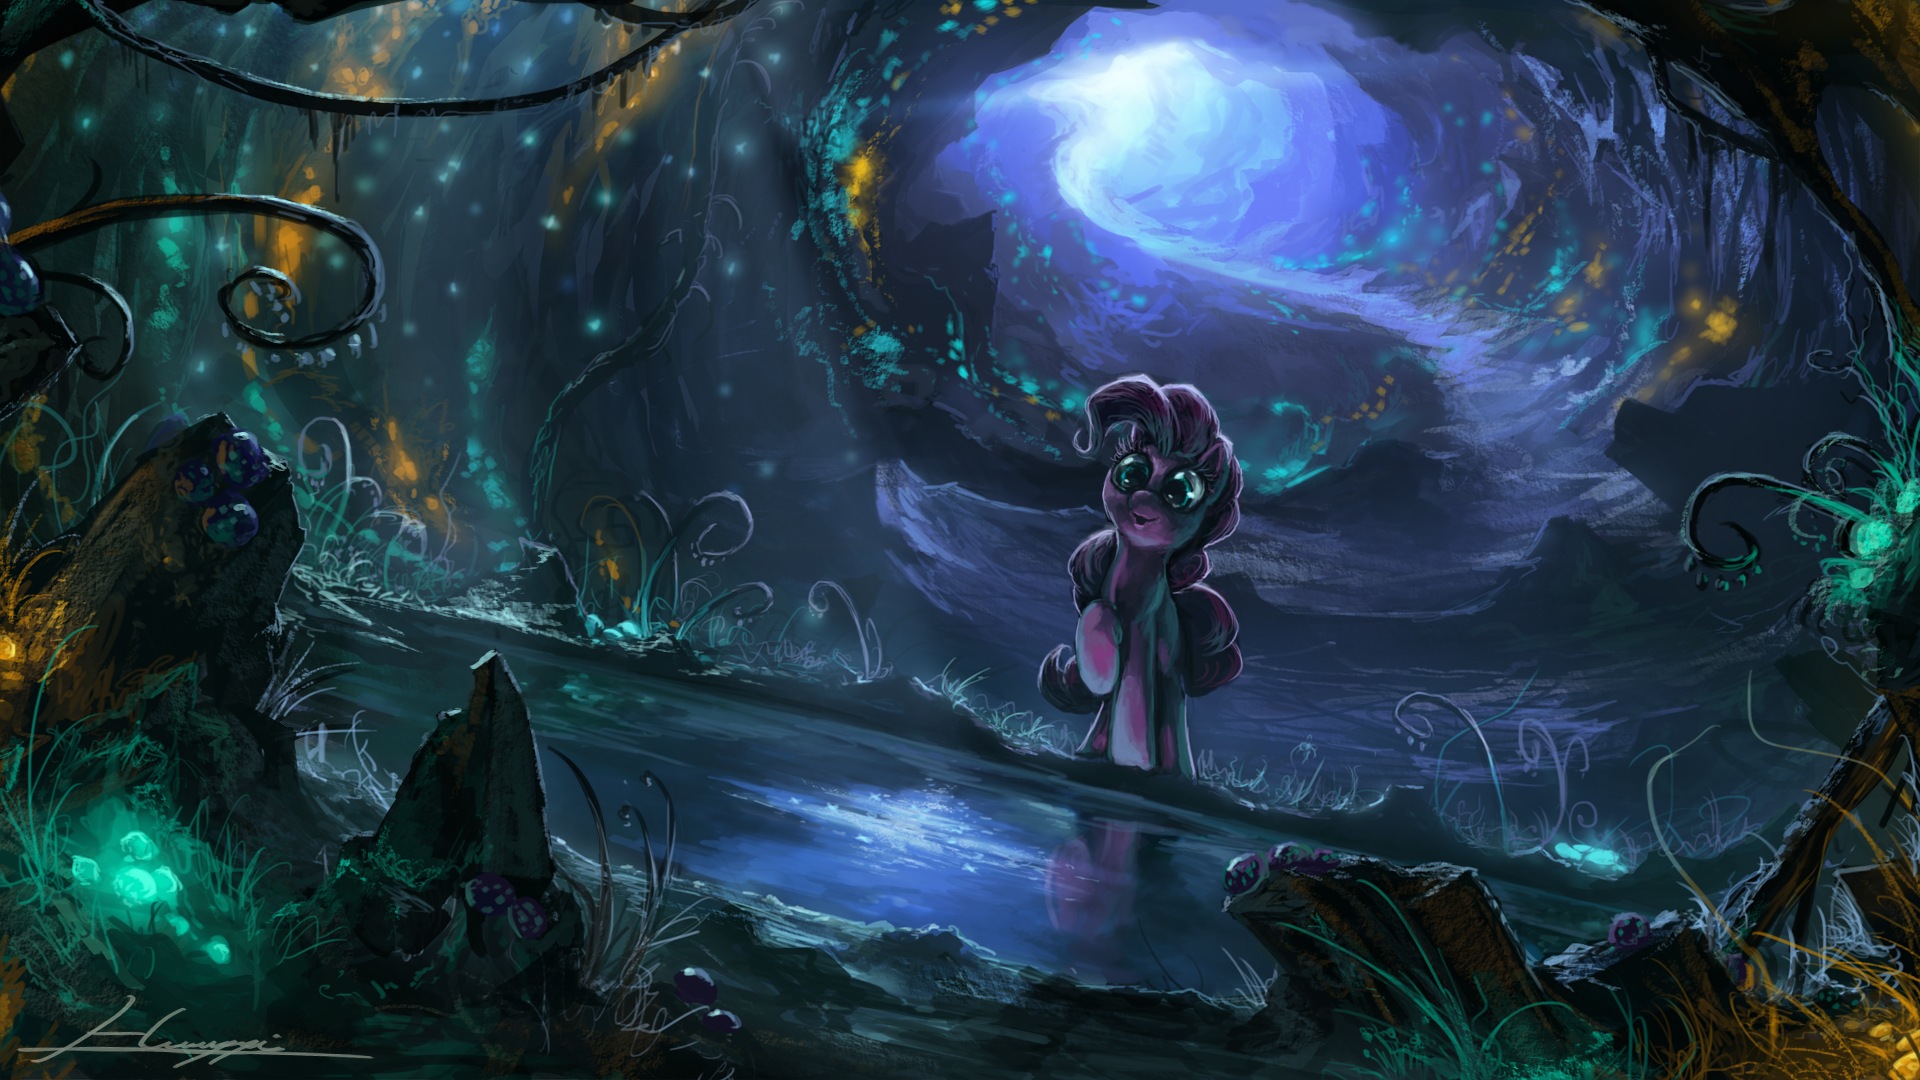 MLP - Mirror Pond by Huussii